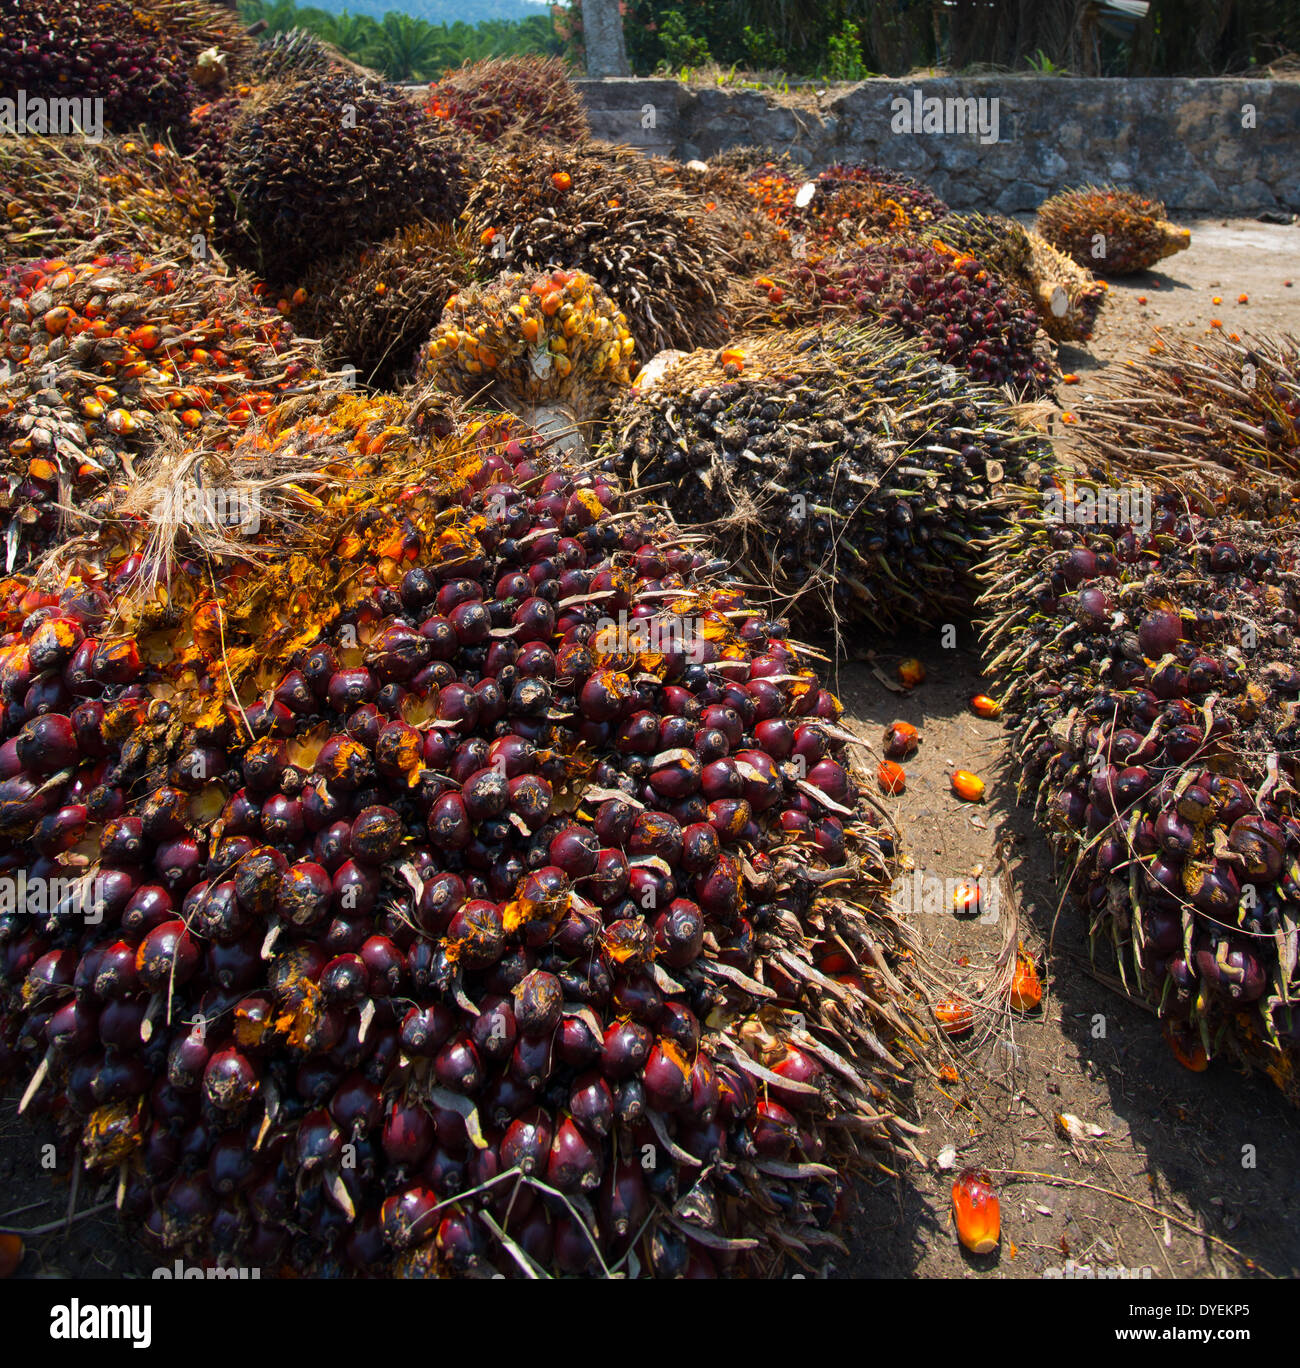 Red fruits of the Oil Palm (Elaeis guineensis) collected for processing & refinement into palm oil, Pahang, Malaysia Stock Photo